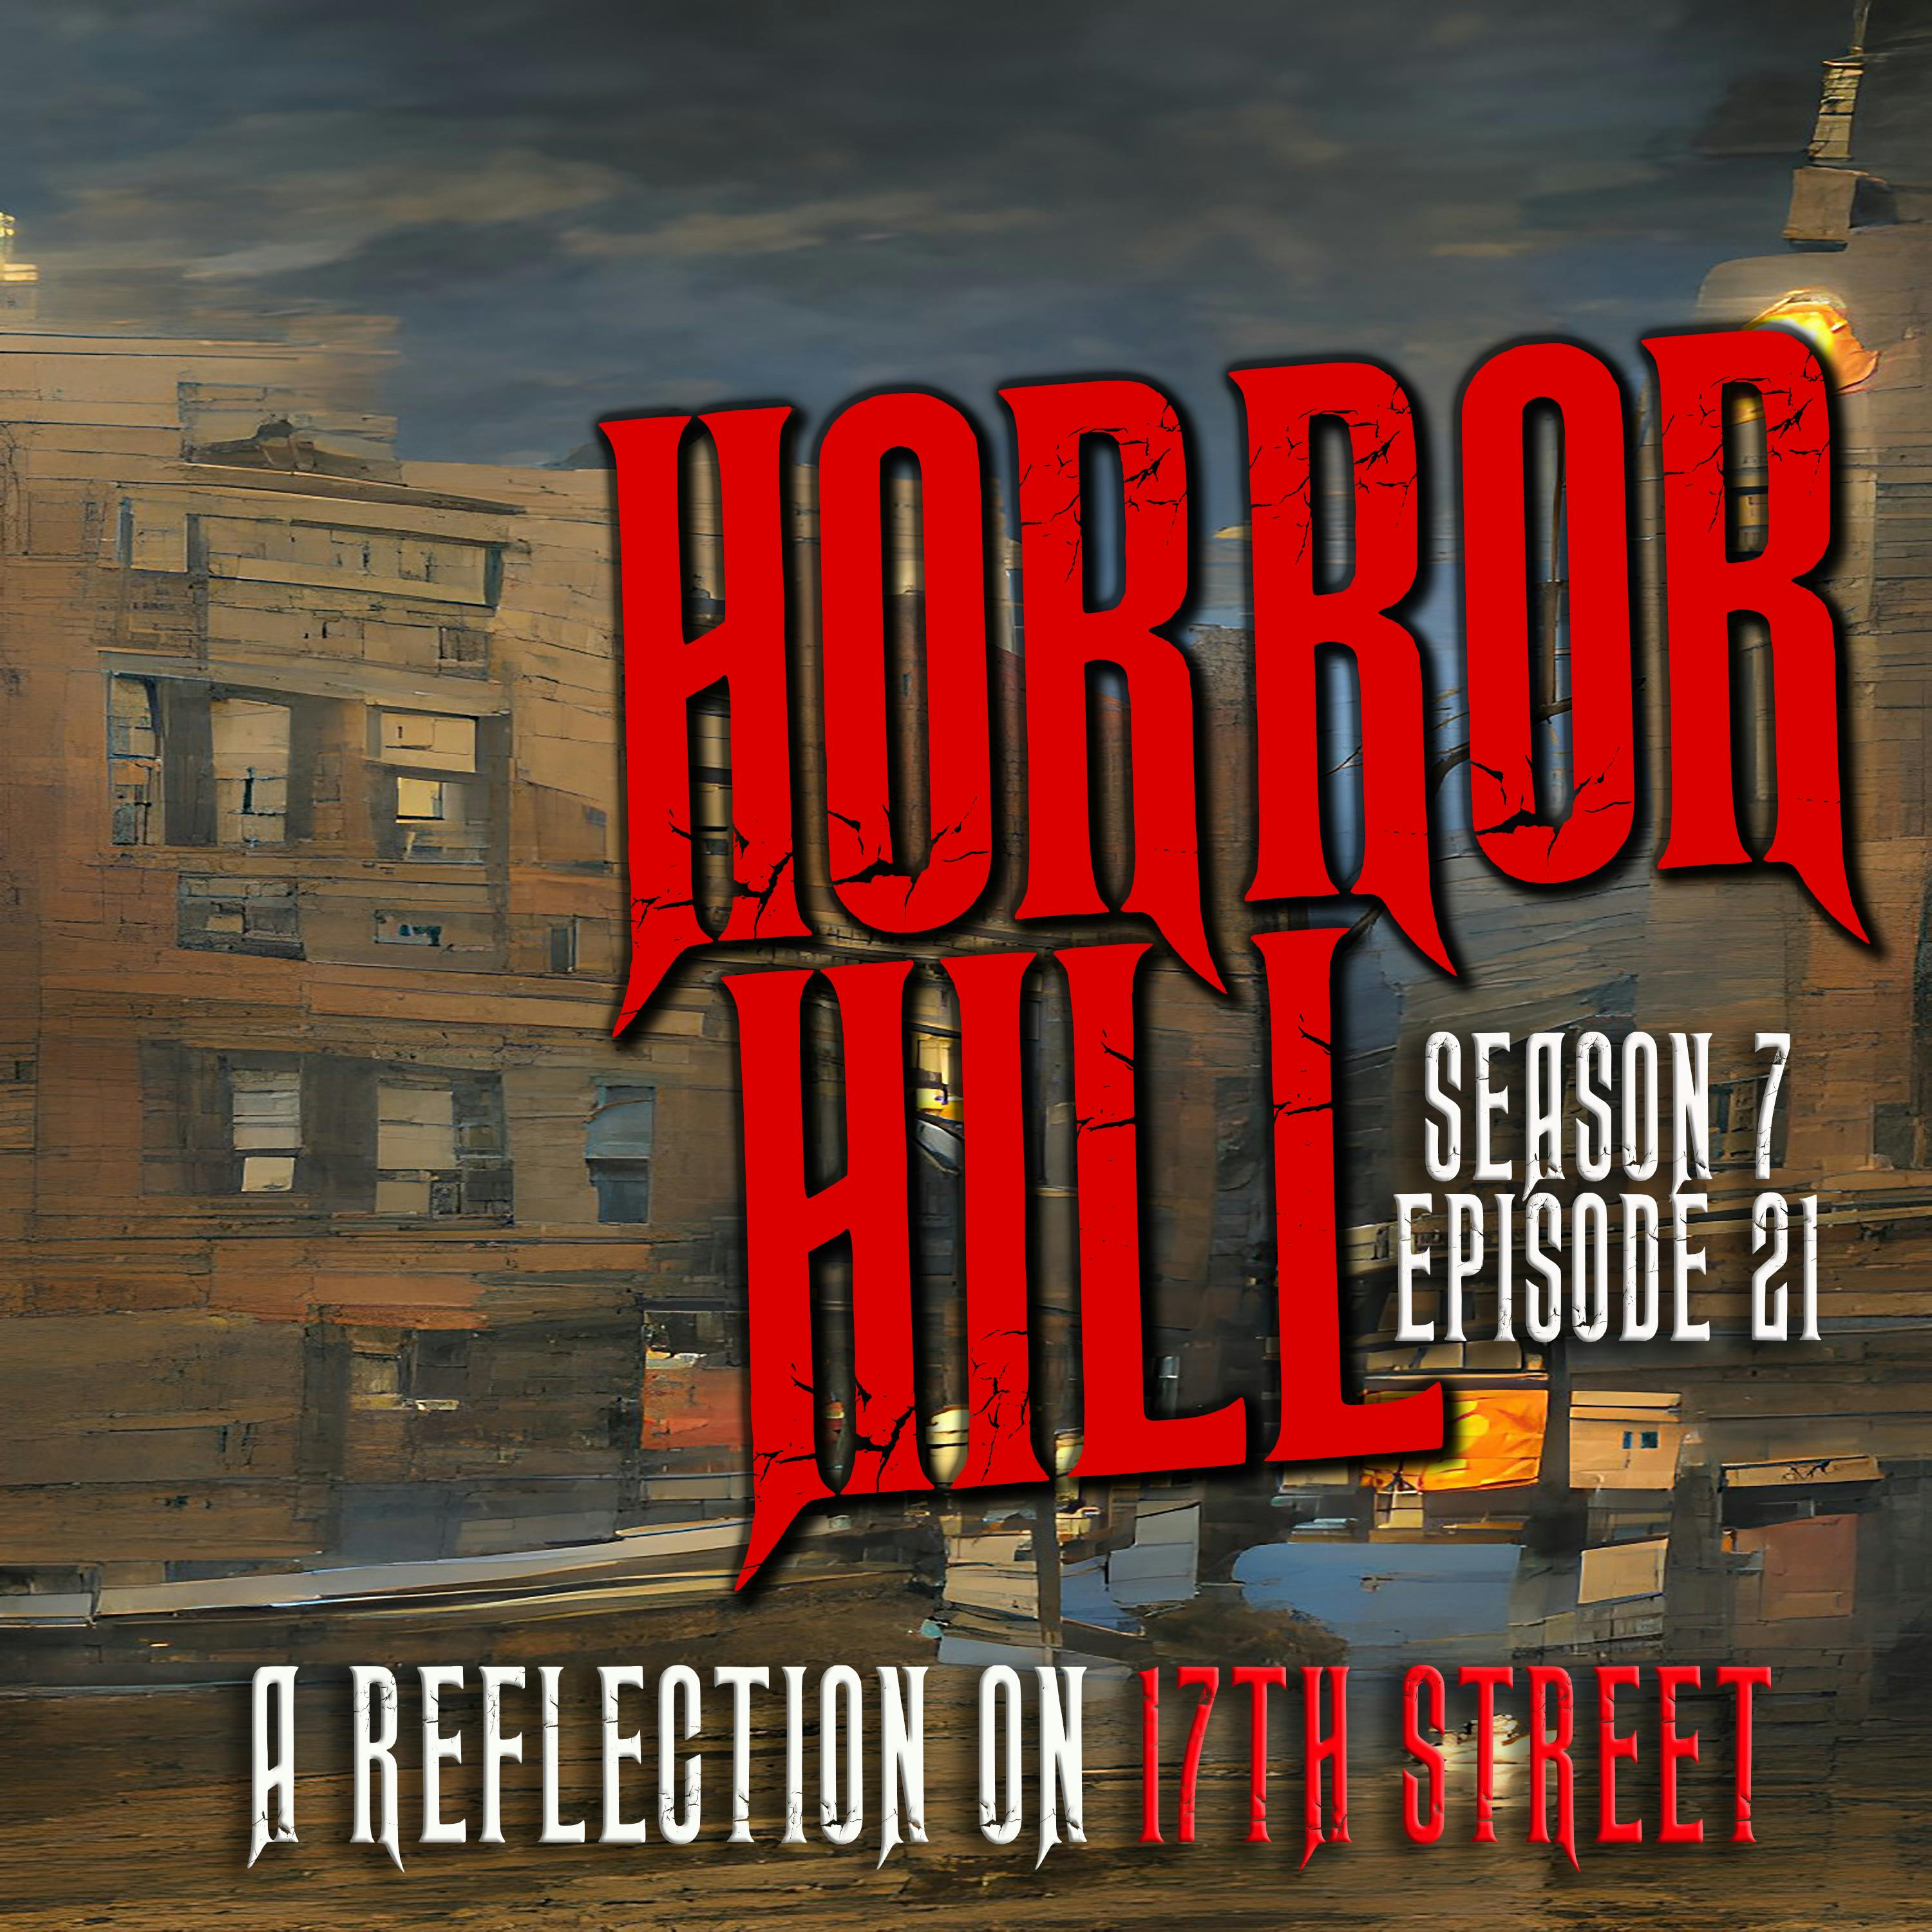 S7E21 - "A Reflection on 17th Street" - Horror Hill